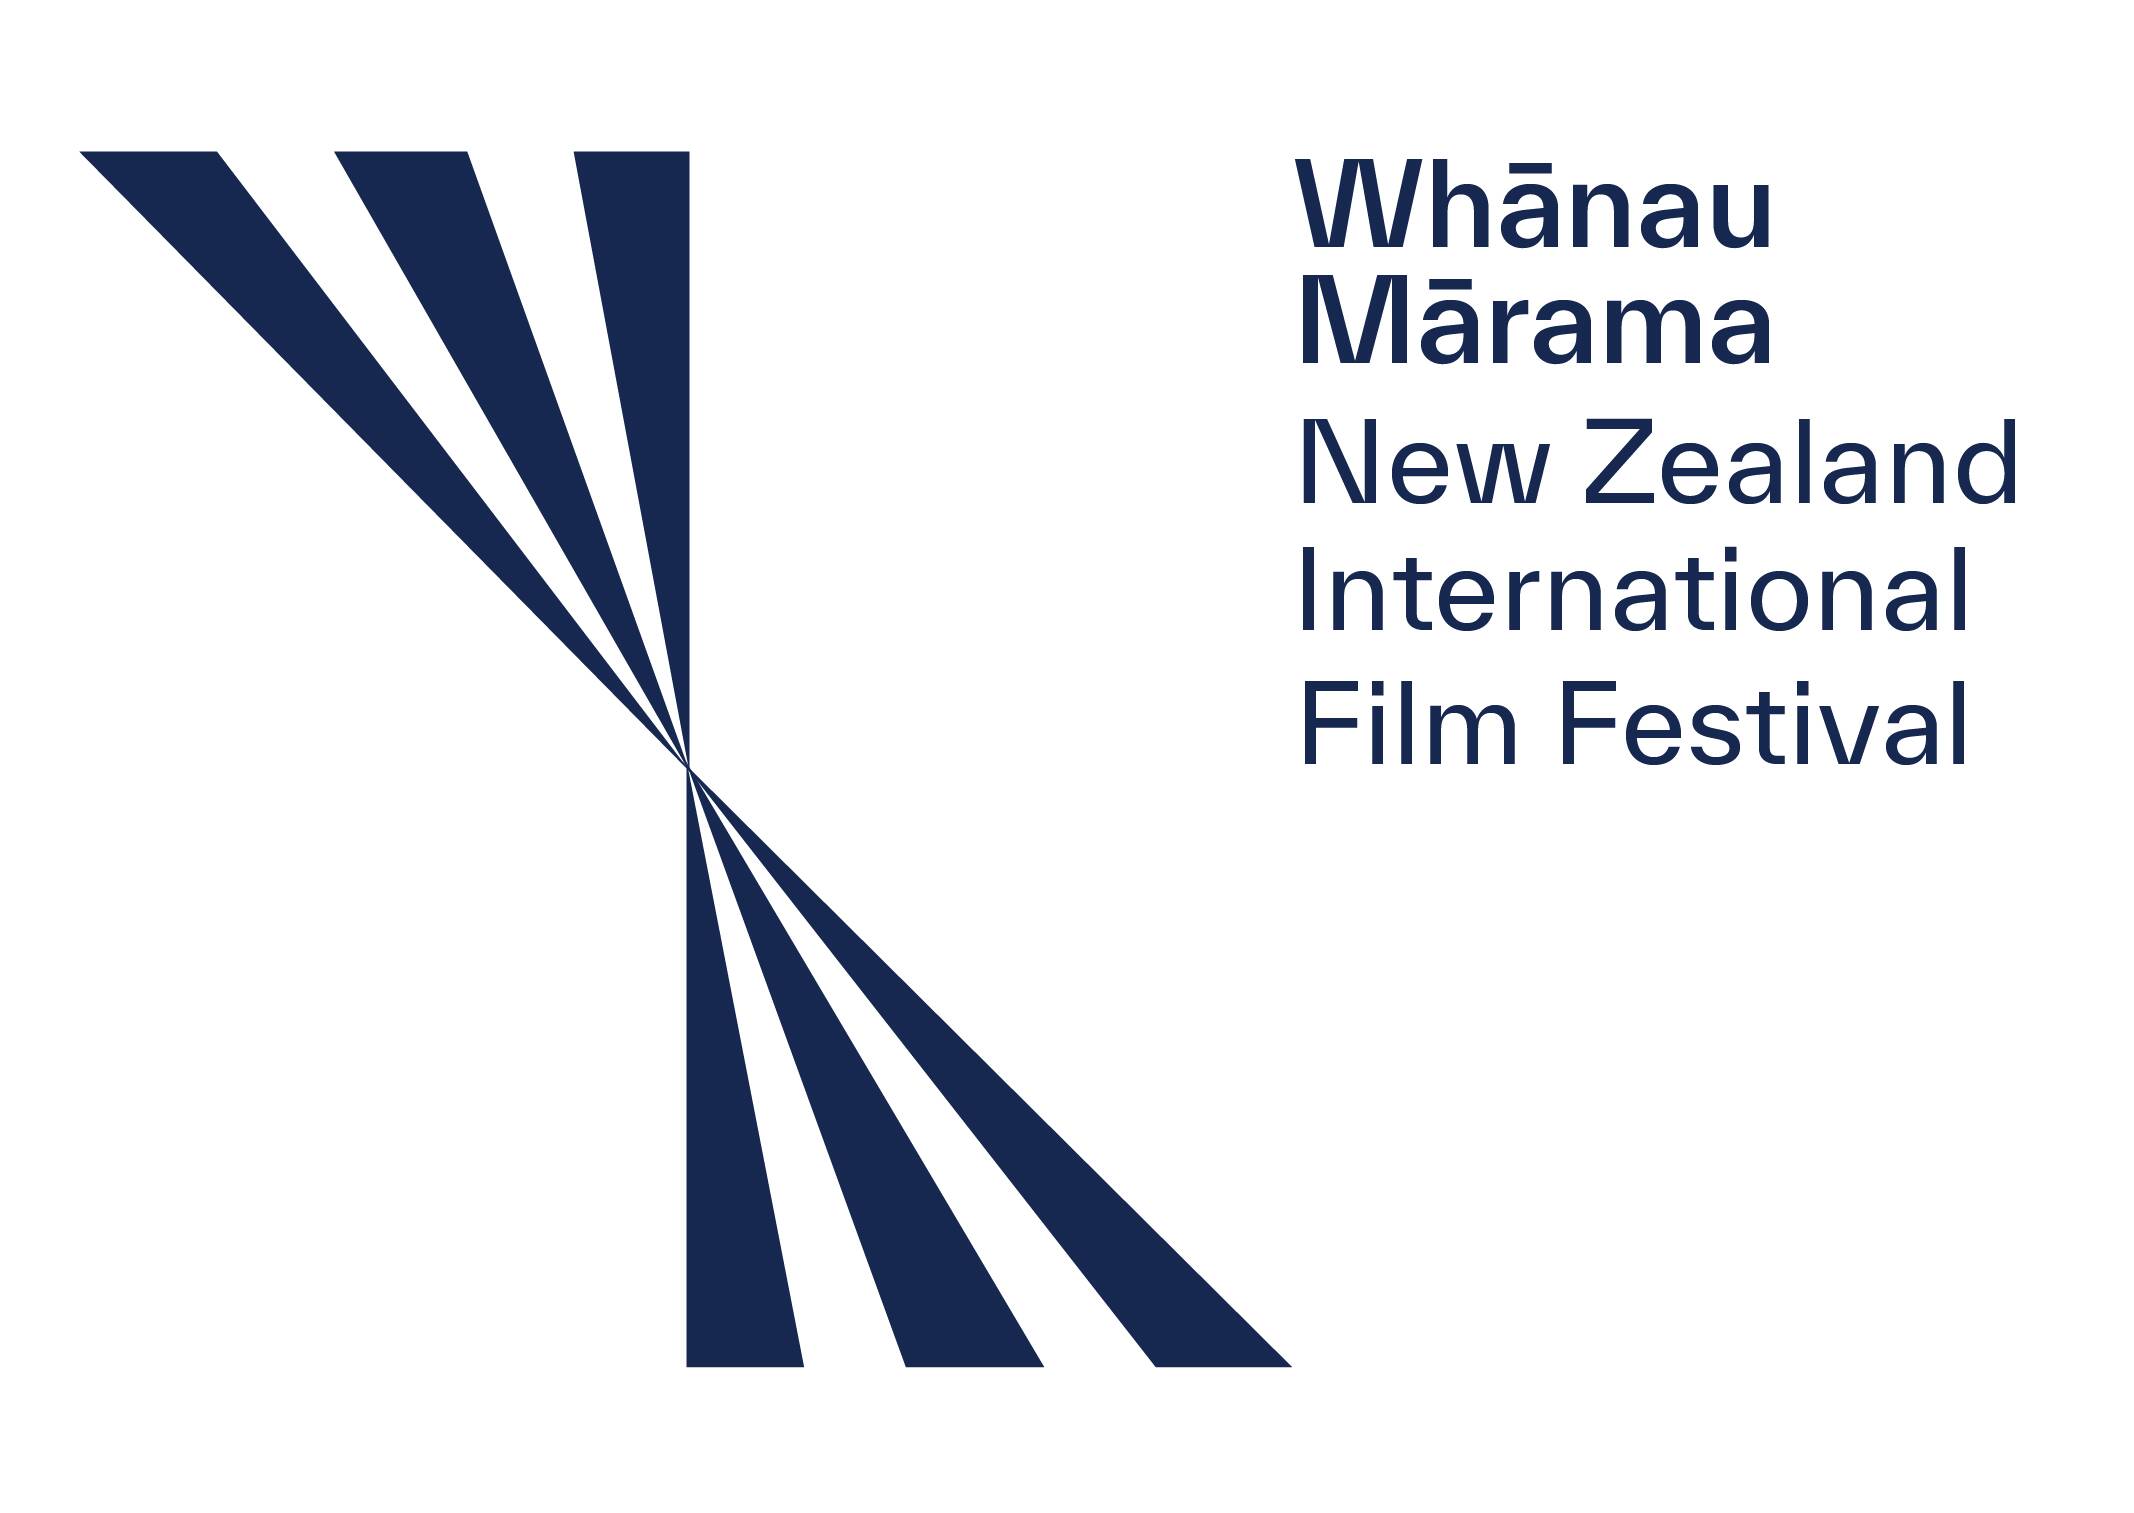 New Zealand International Film Festival text on white background with black.